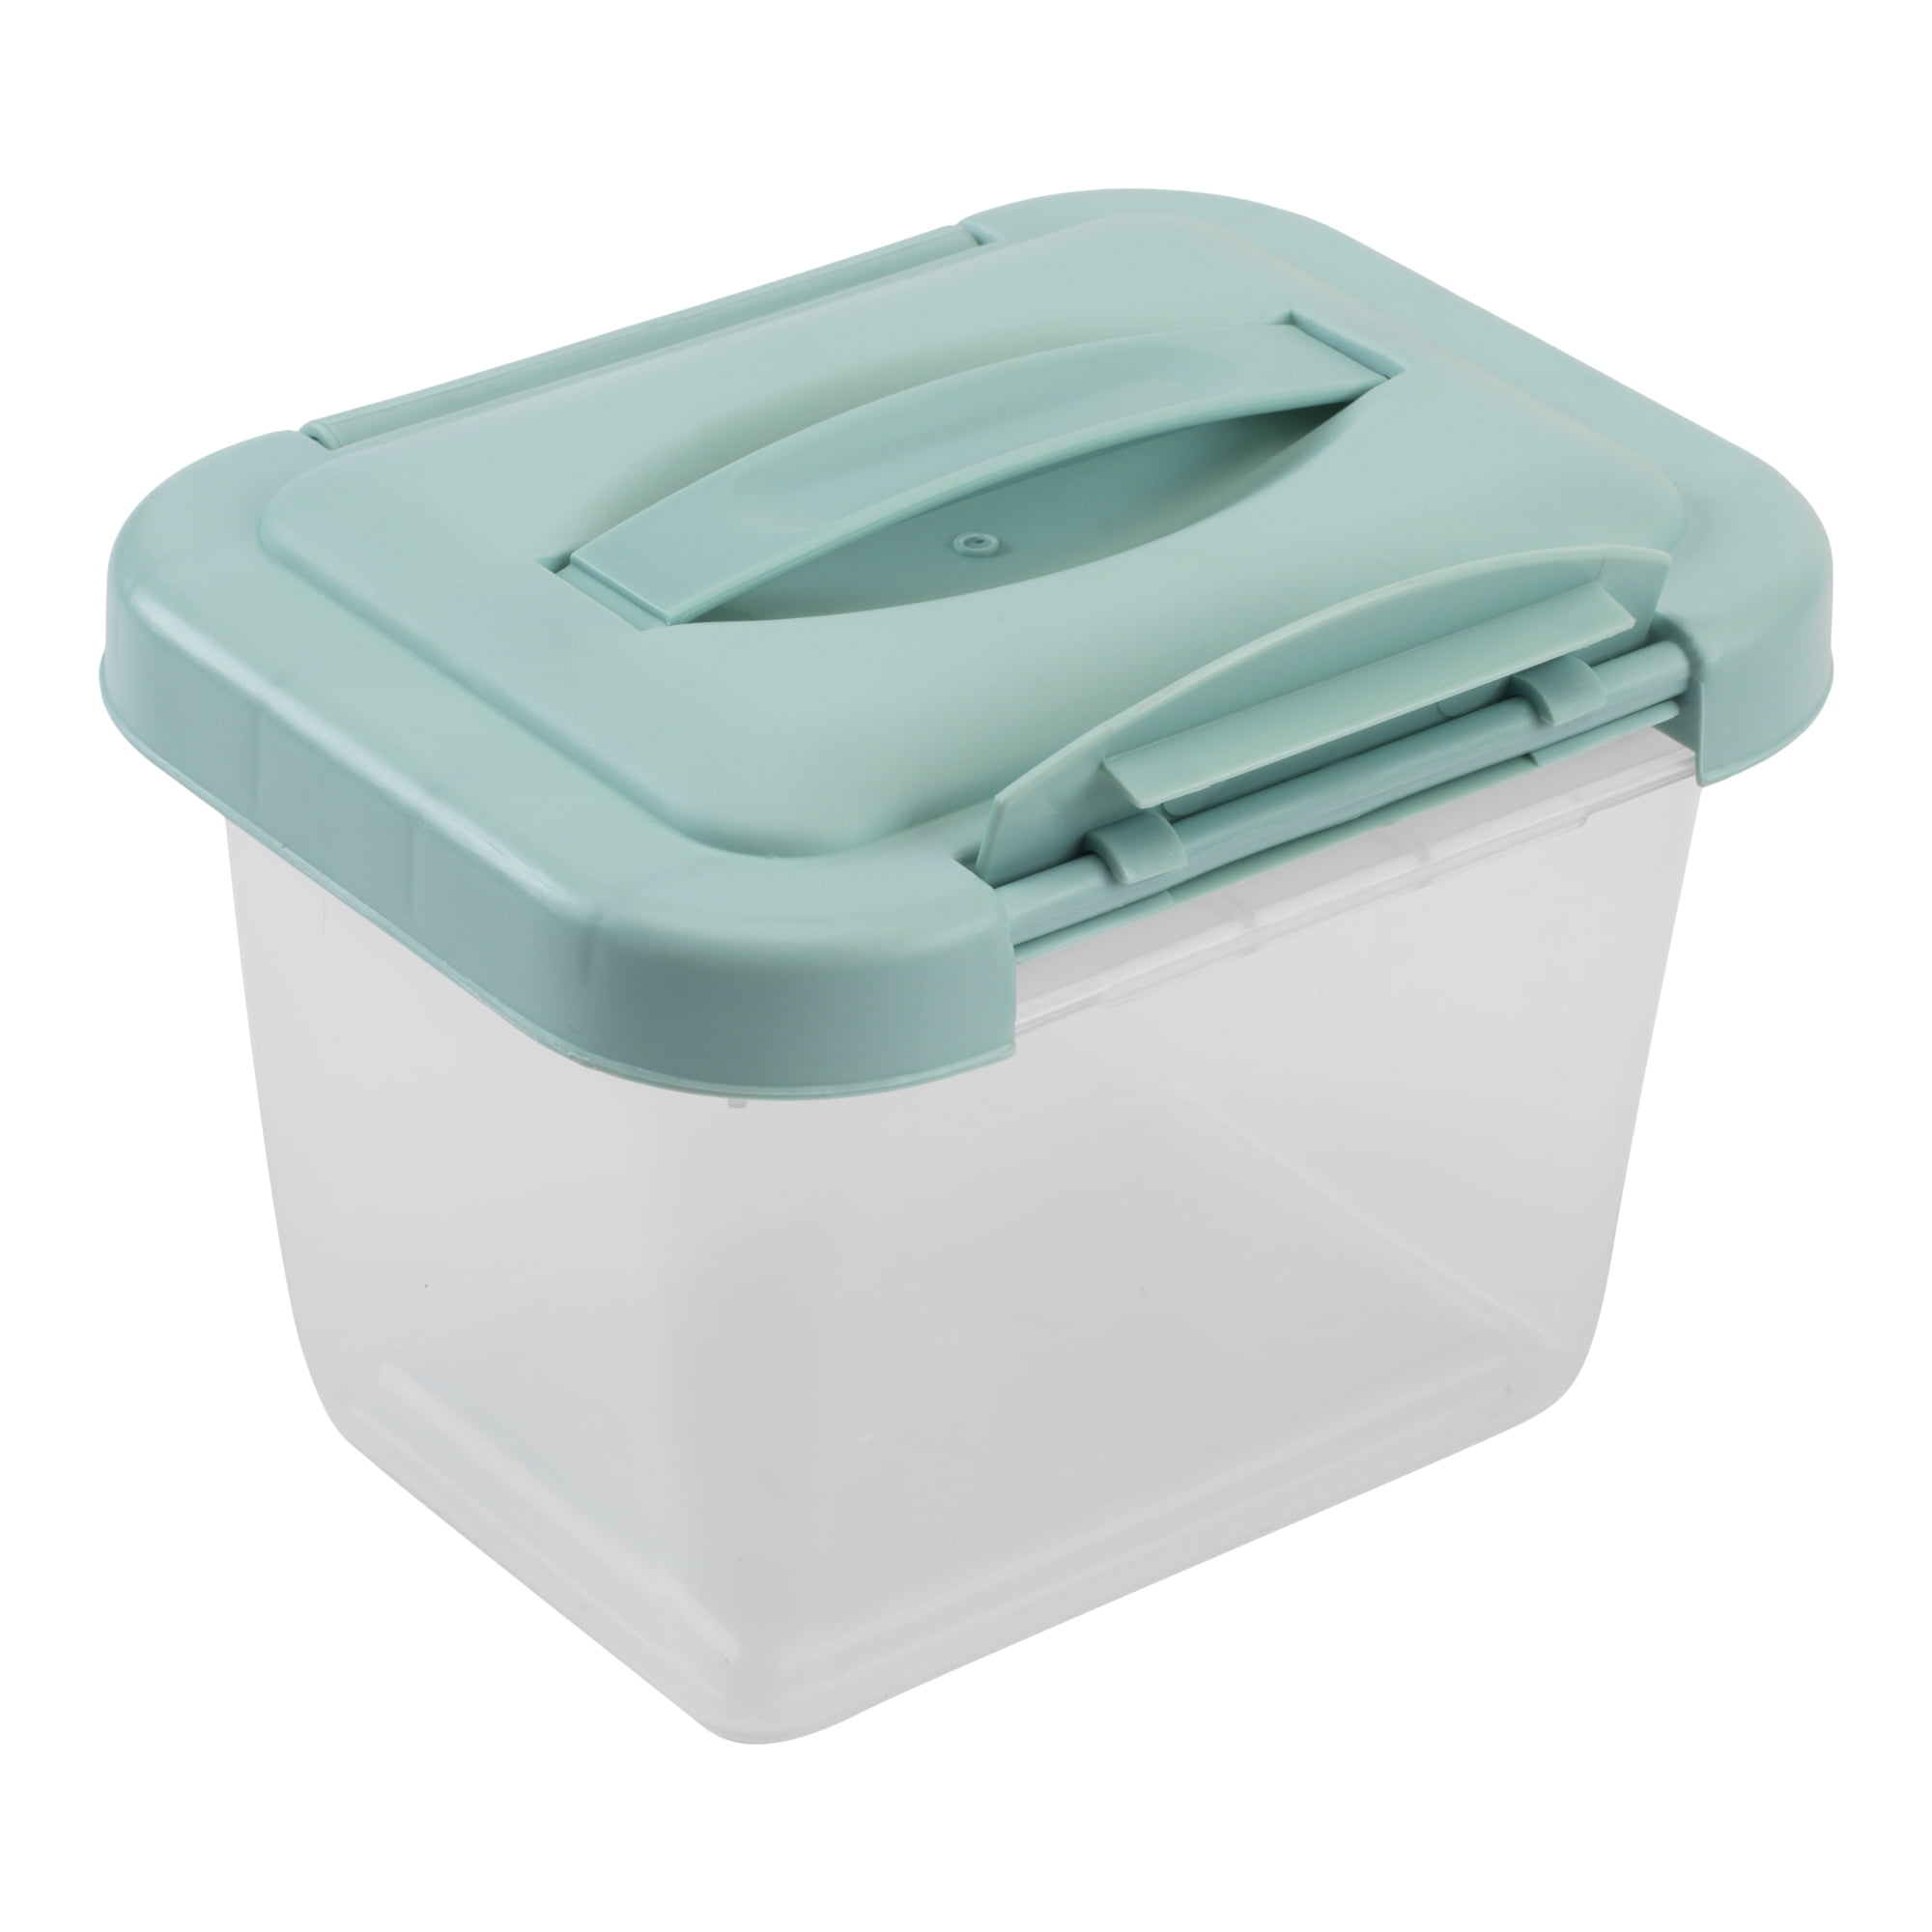 Shape+Store The Smart Cookie Innovative Cookie Cutter and Freezer Container Blue